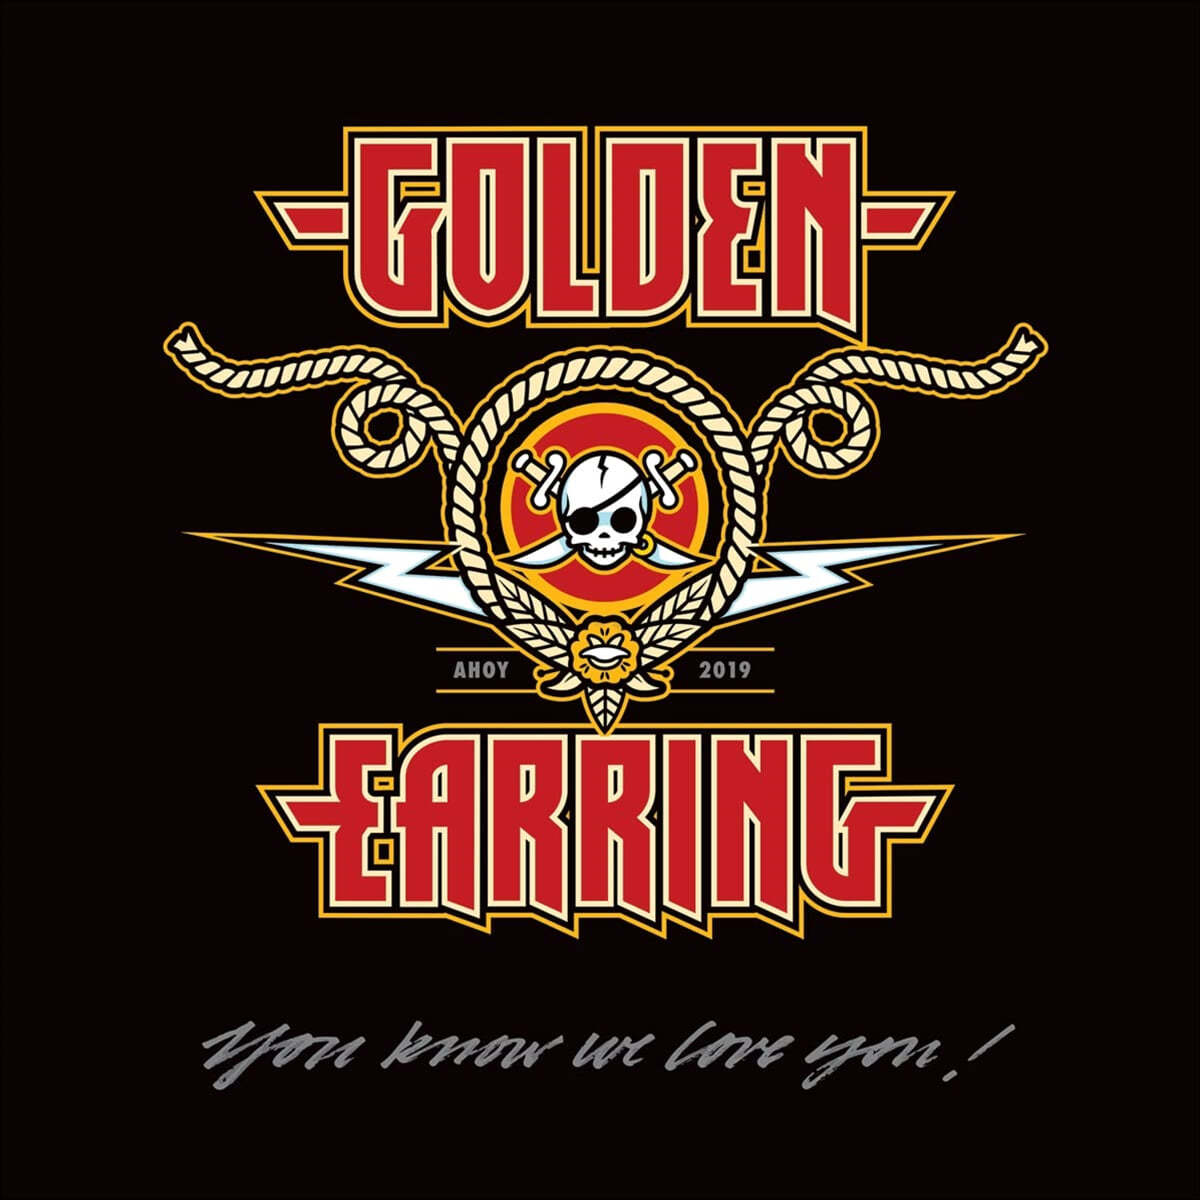 Golden Earring (골든 이어링) - You Know We Love You! [골드 컬러 3LP]